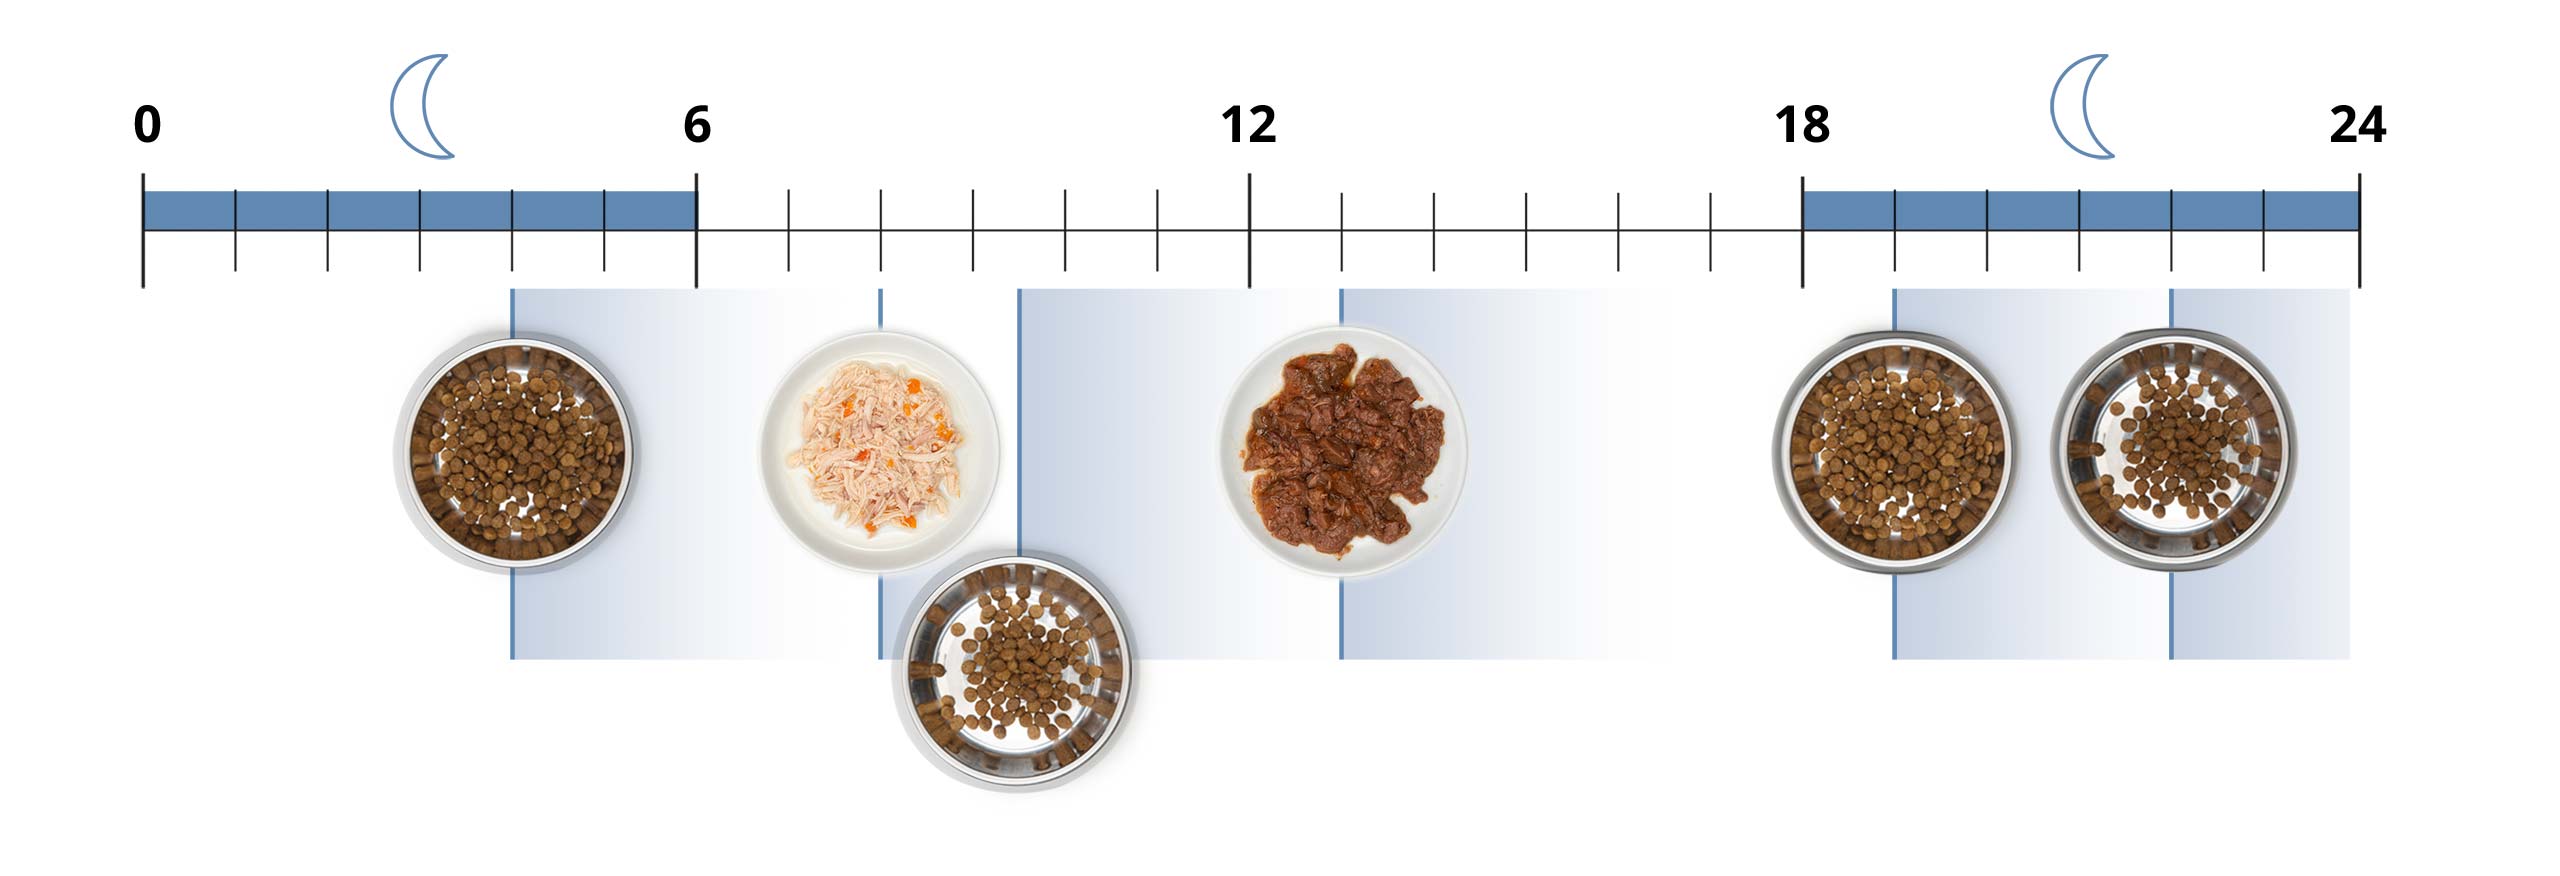 Example of a 24-hour feeding schedule for cats